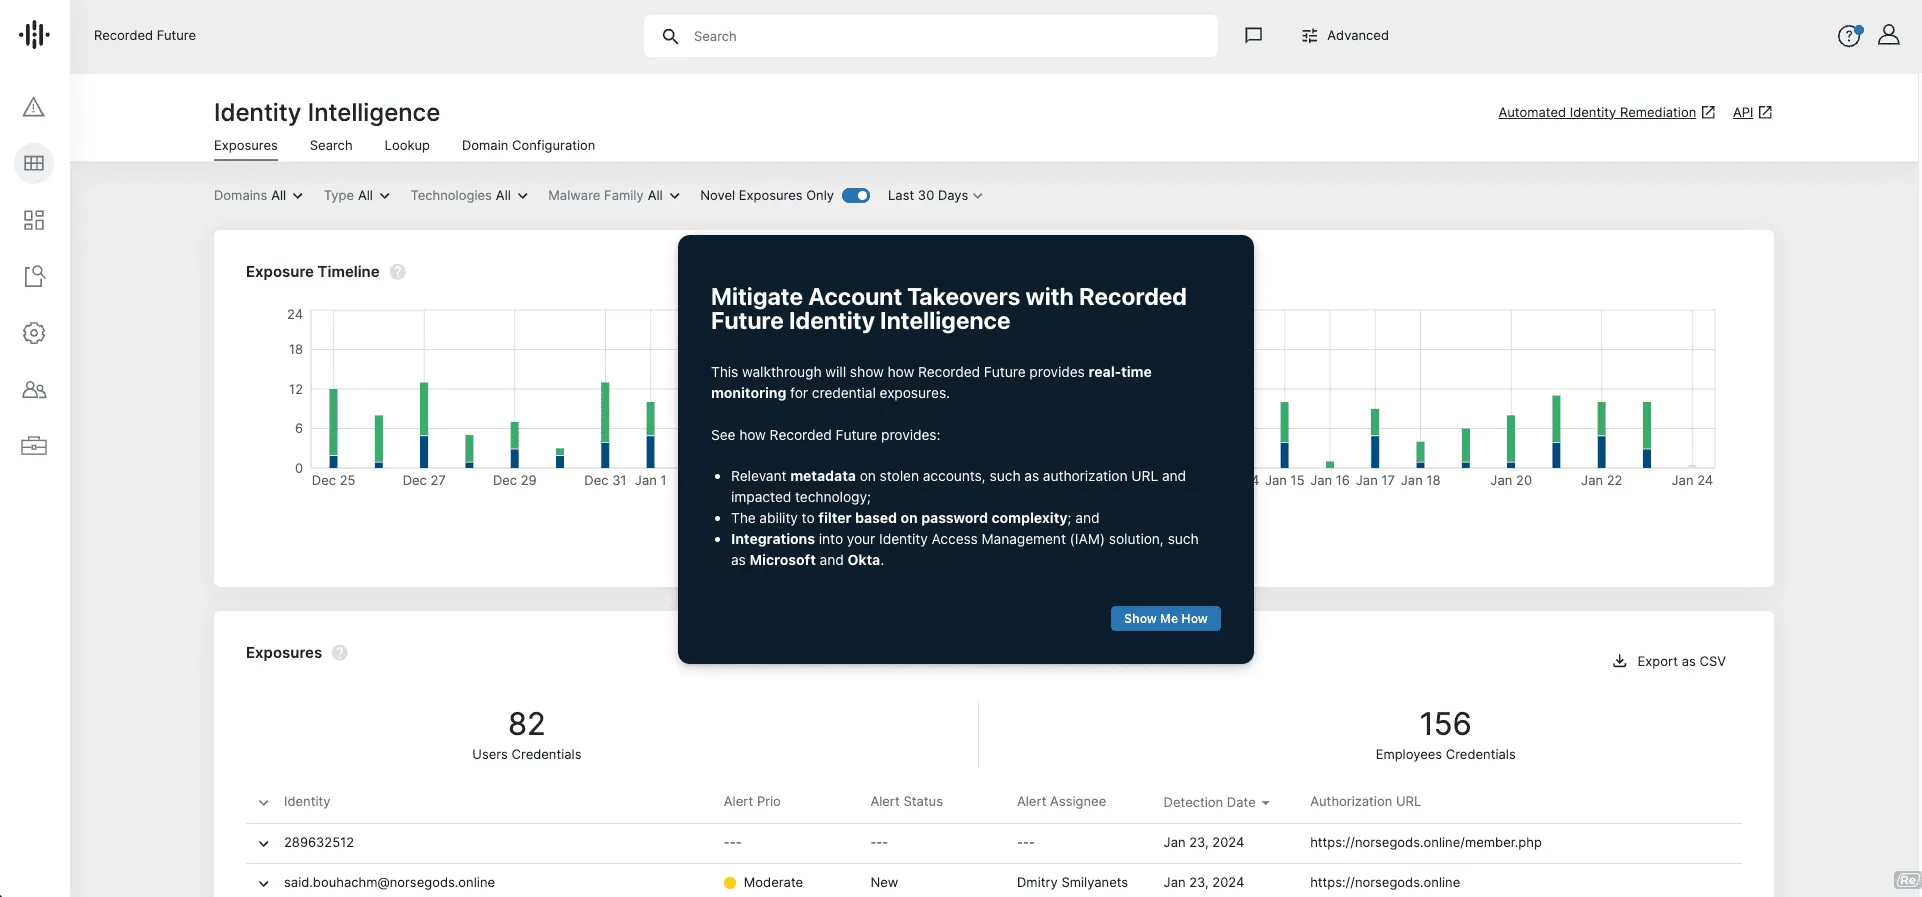 Mitigate Account Takeovers with Recorded Future Identity Intelligence